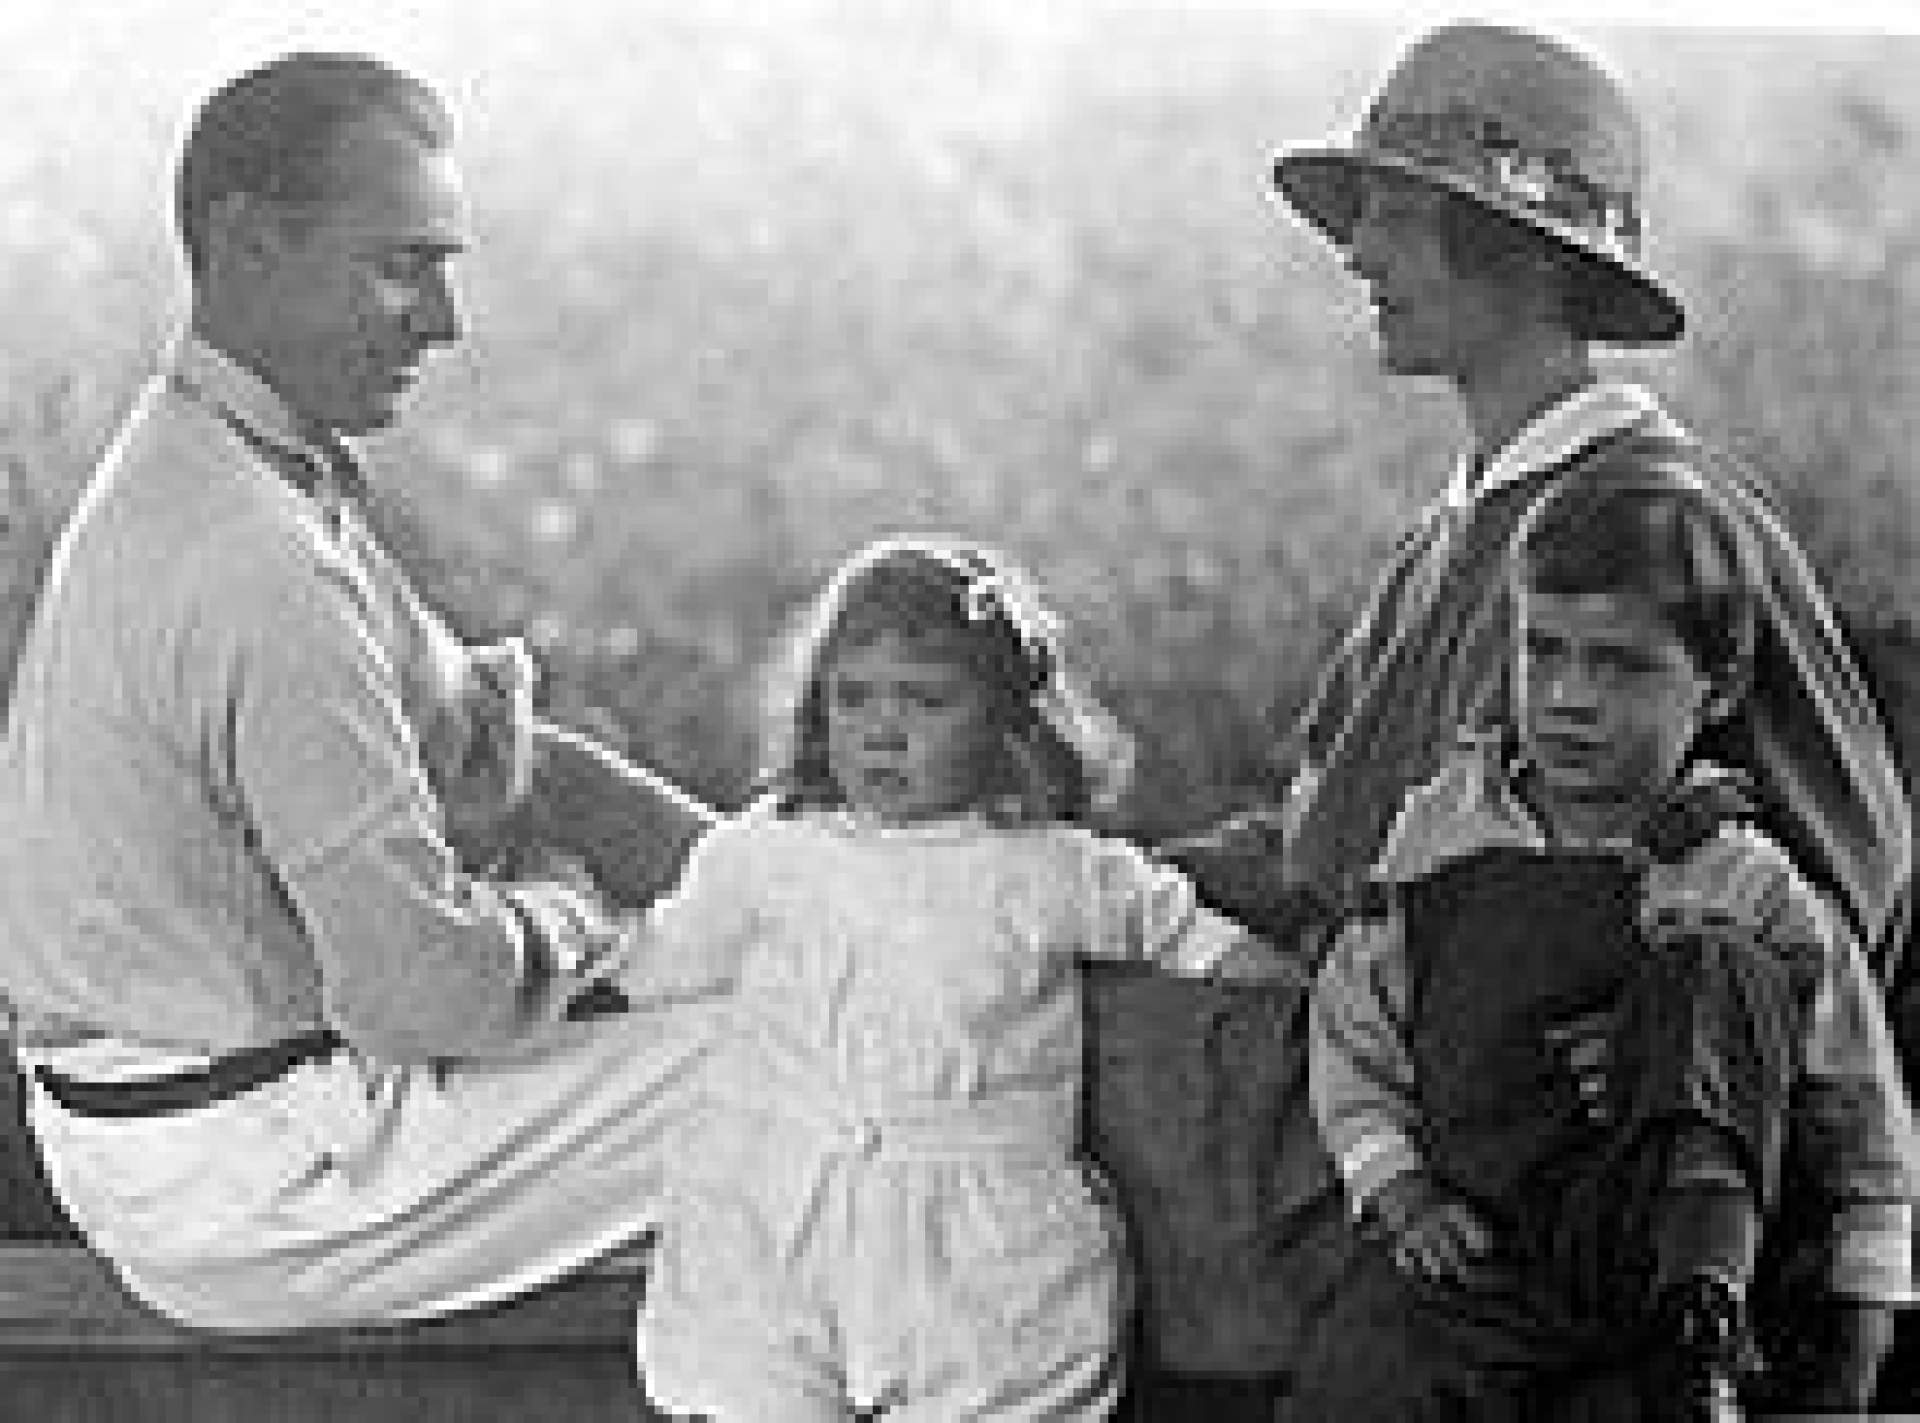 Charles Cary Rumsey and Mary Harriman Rumsey with their children Mary Averell Harriman and Charles Cary